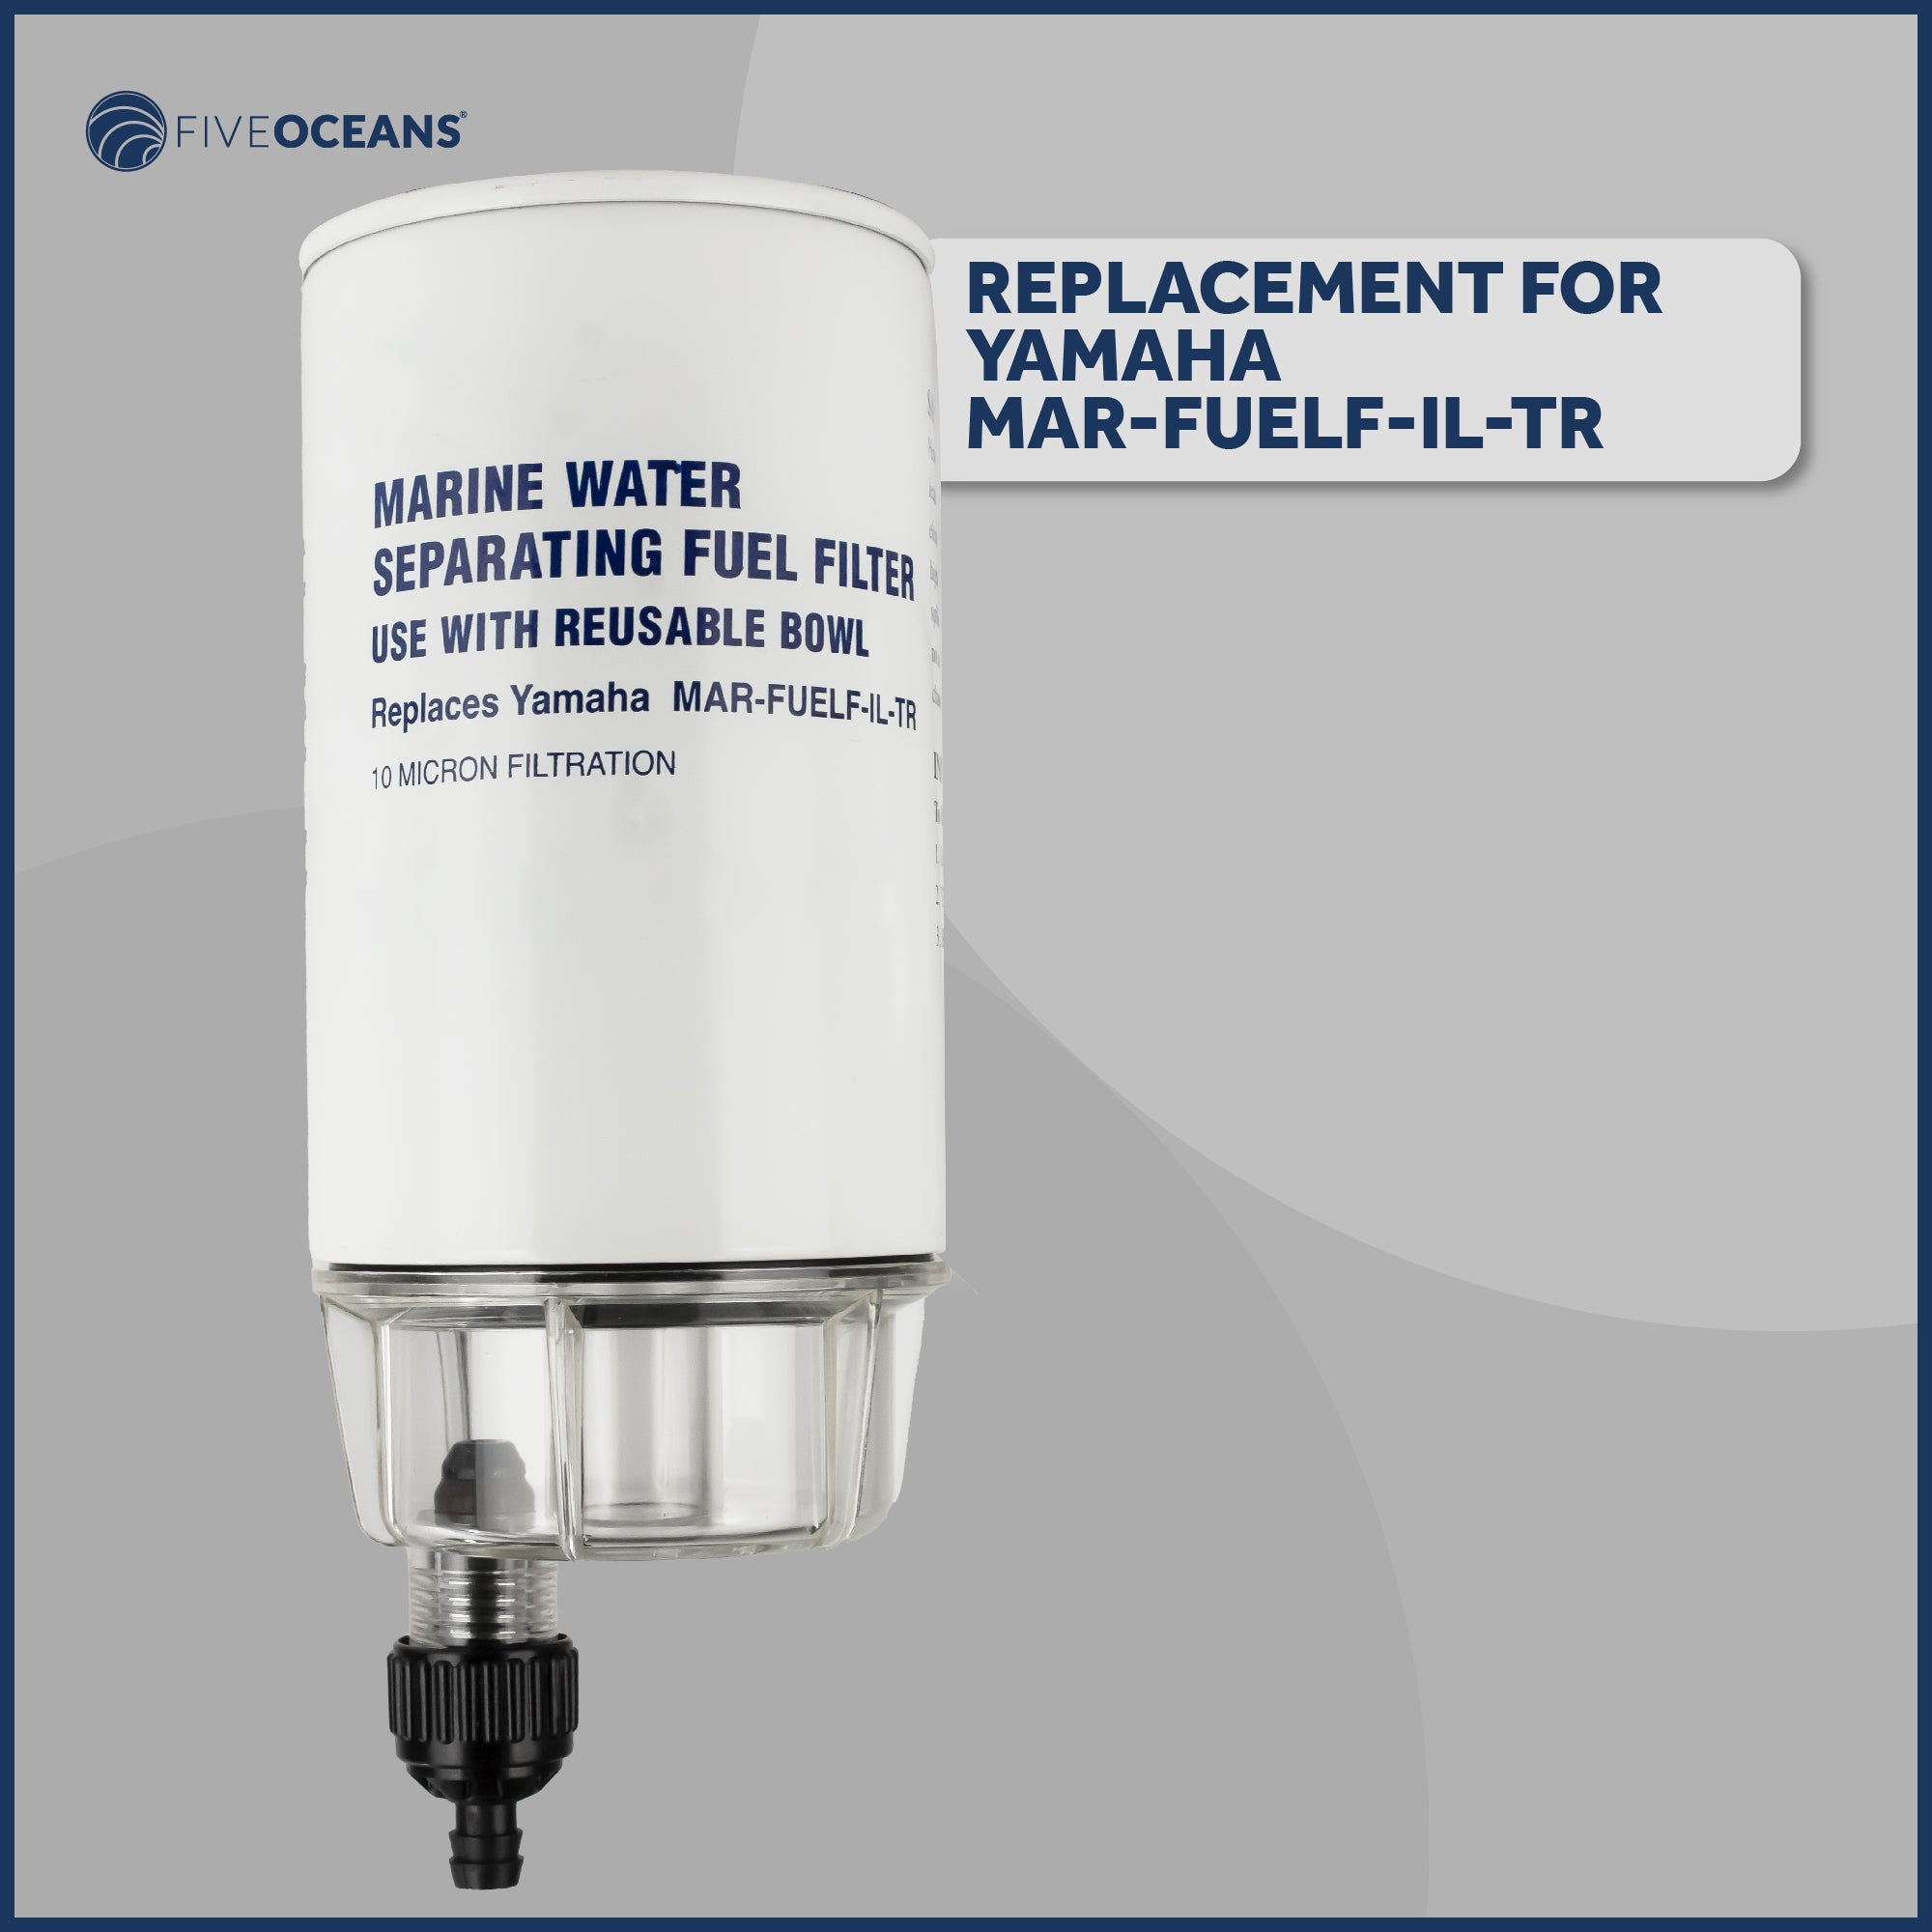 Fuel Filter Water Separator with Clear Bowl for MAR-FUELF-IL-TR - 4471